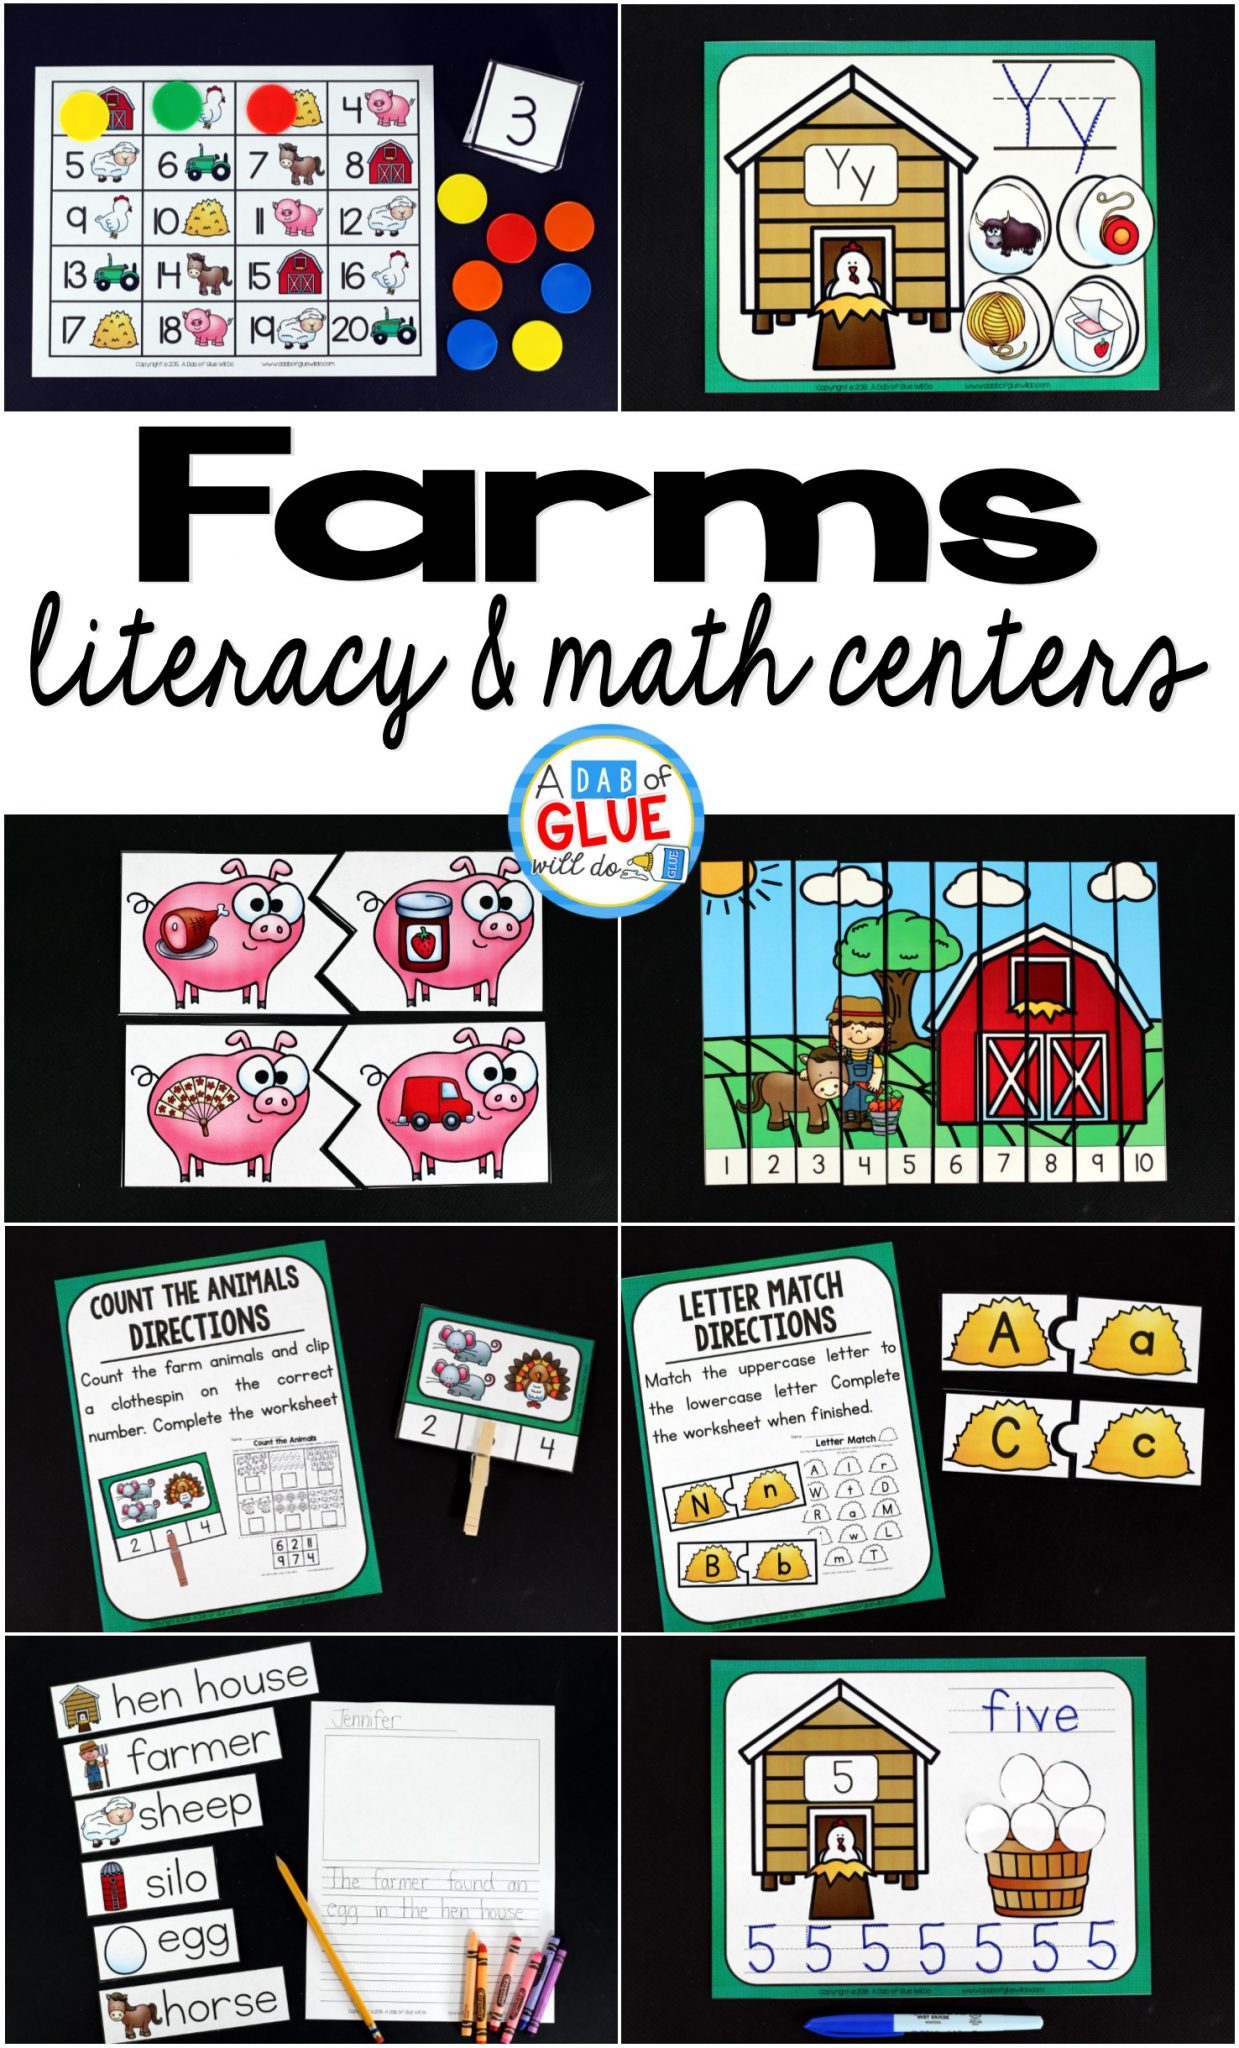 Engage your class in an exciting hands-on experience learning more about farms! This Farm Literacy and Math Centers resource is perfect for language arts and math centers in preschool, pre-K, Kindergarten, and First Grade classrooms and packed full of inviting student activities. Celebrate fall or spring with farm themed center student worksheets.